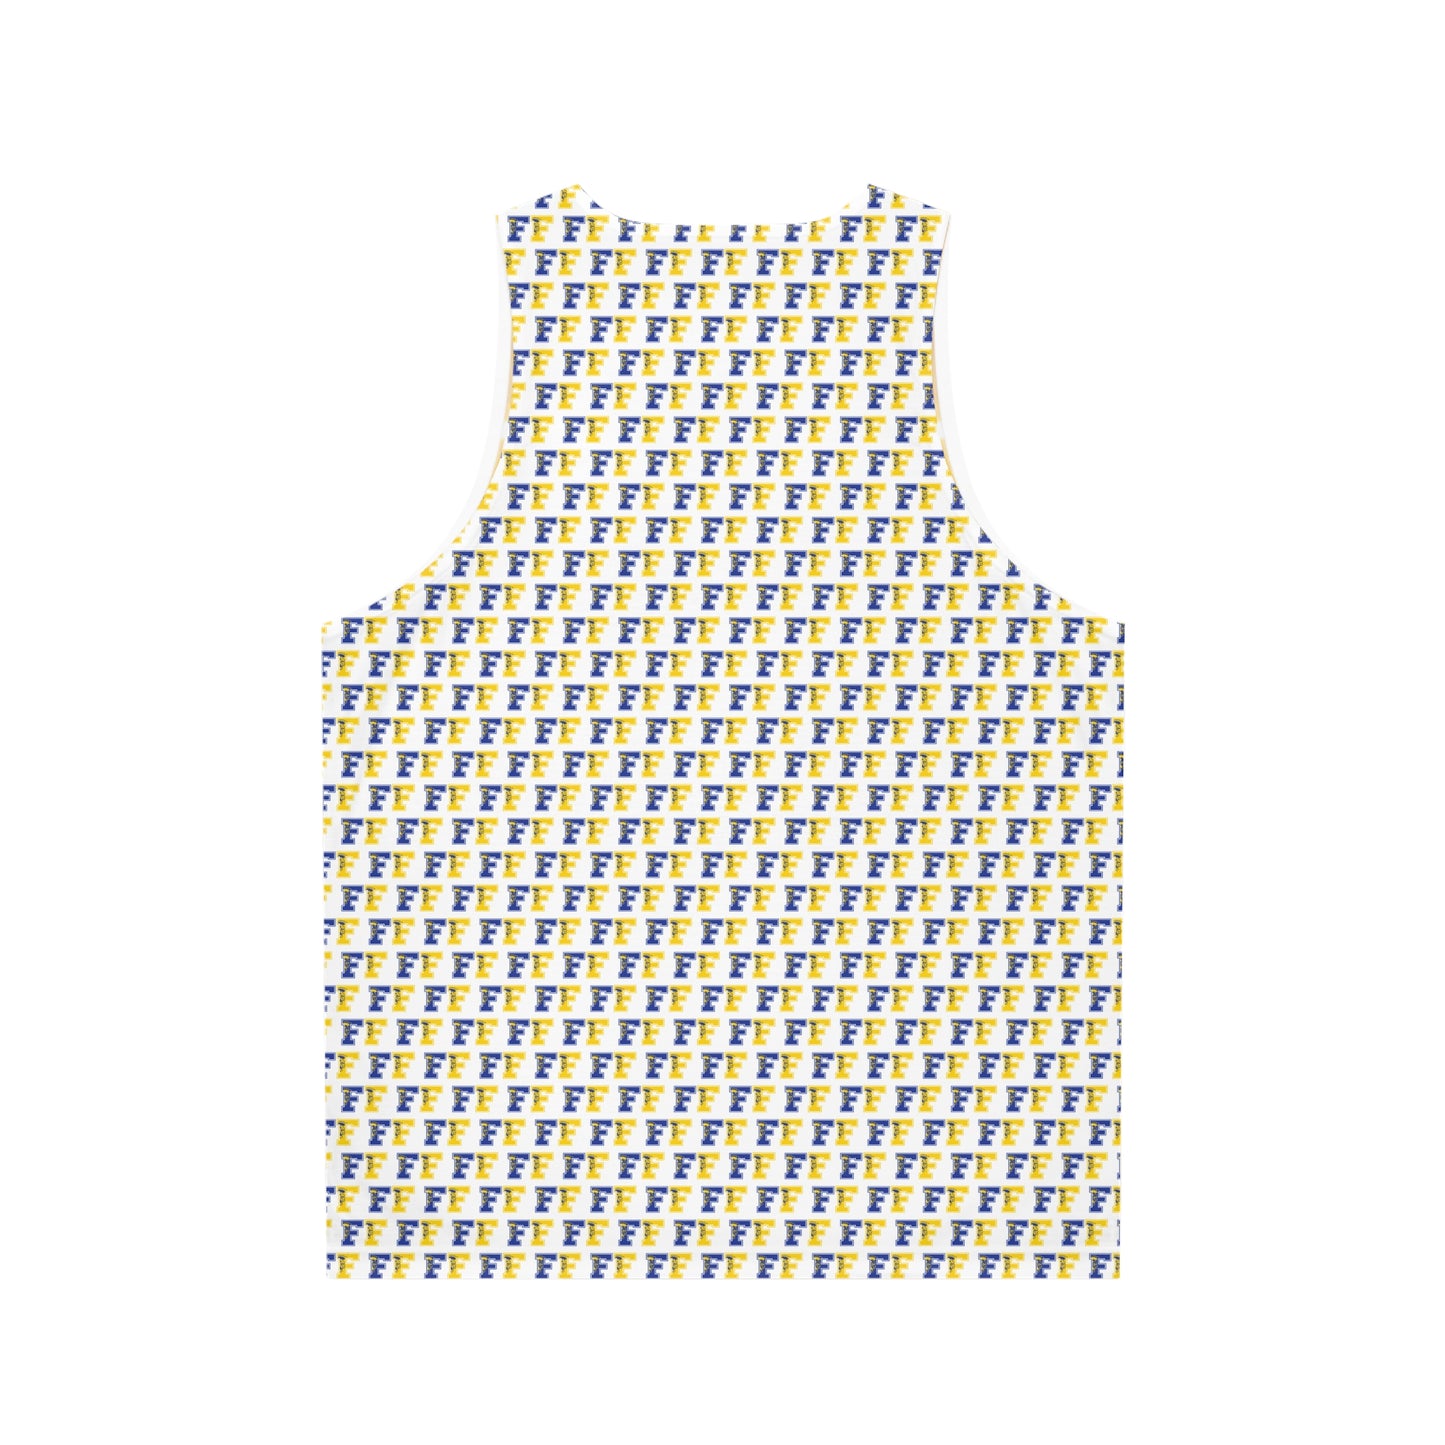 GOLD F Blue and Gold FINDLAY HIGH SCHOOL Unisex Tank Top (AOP)